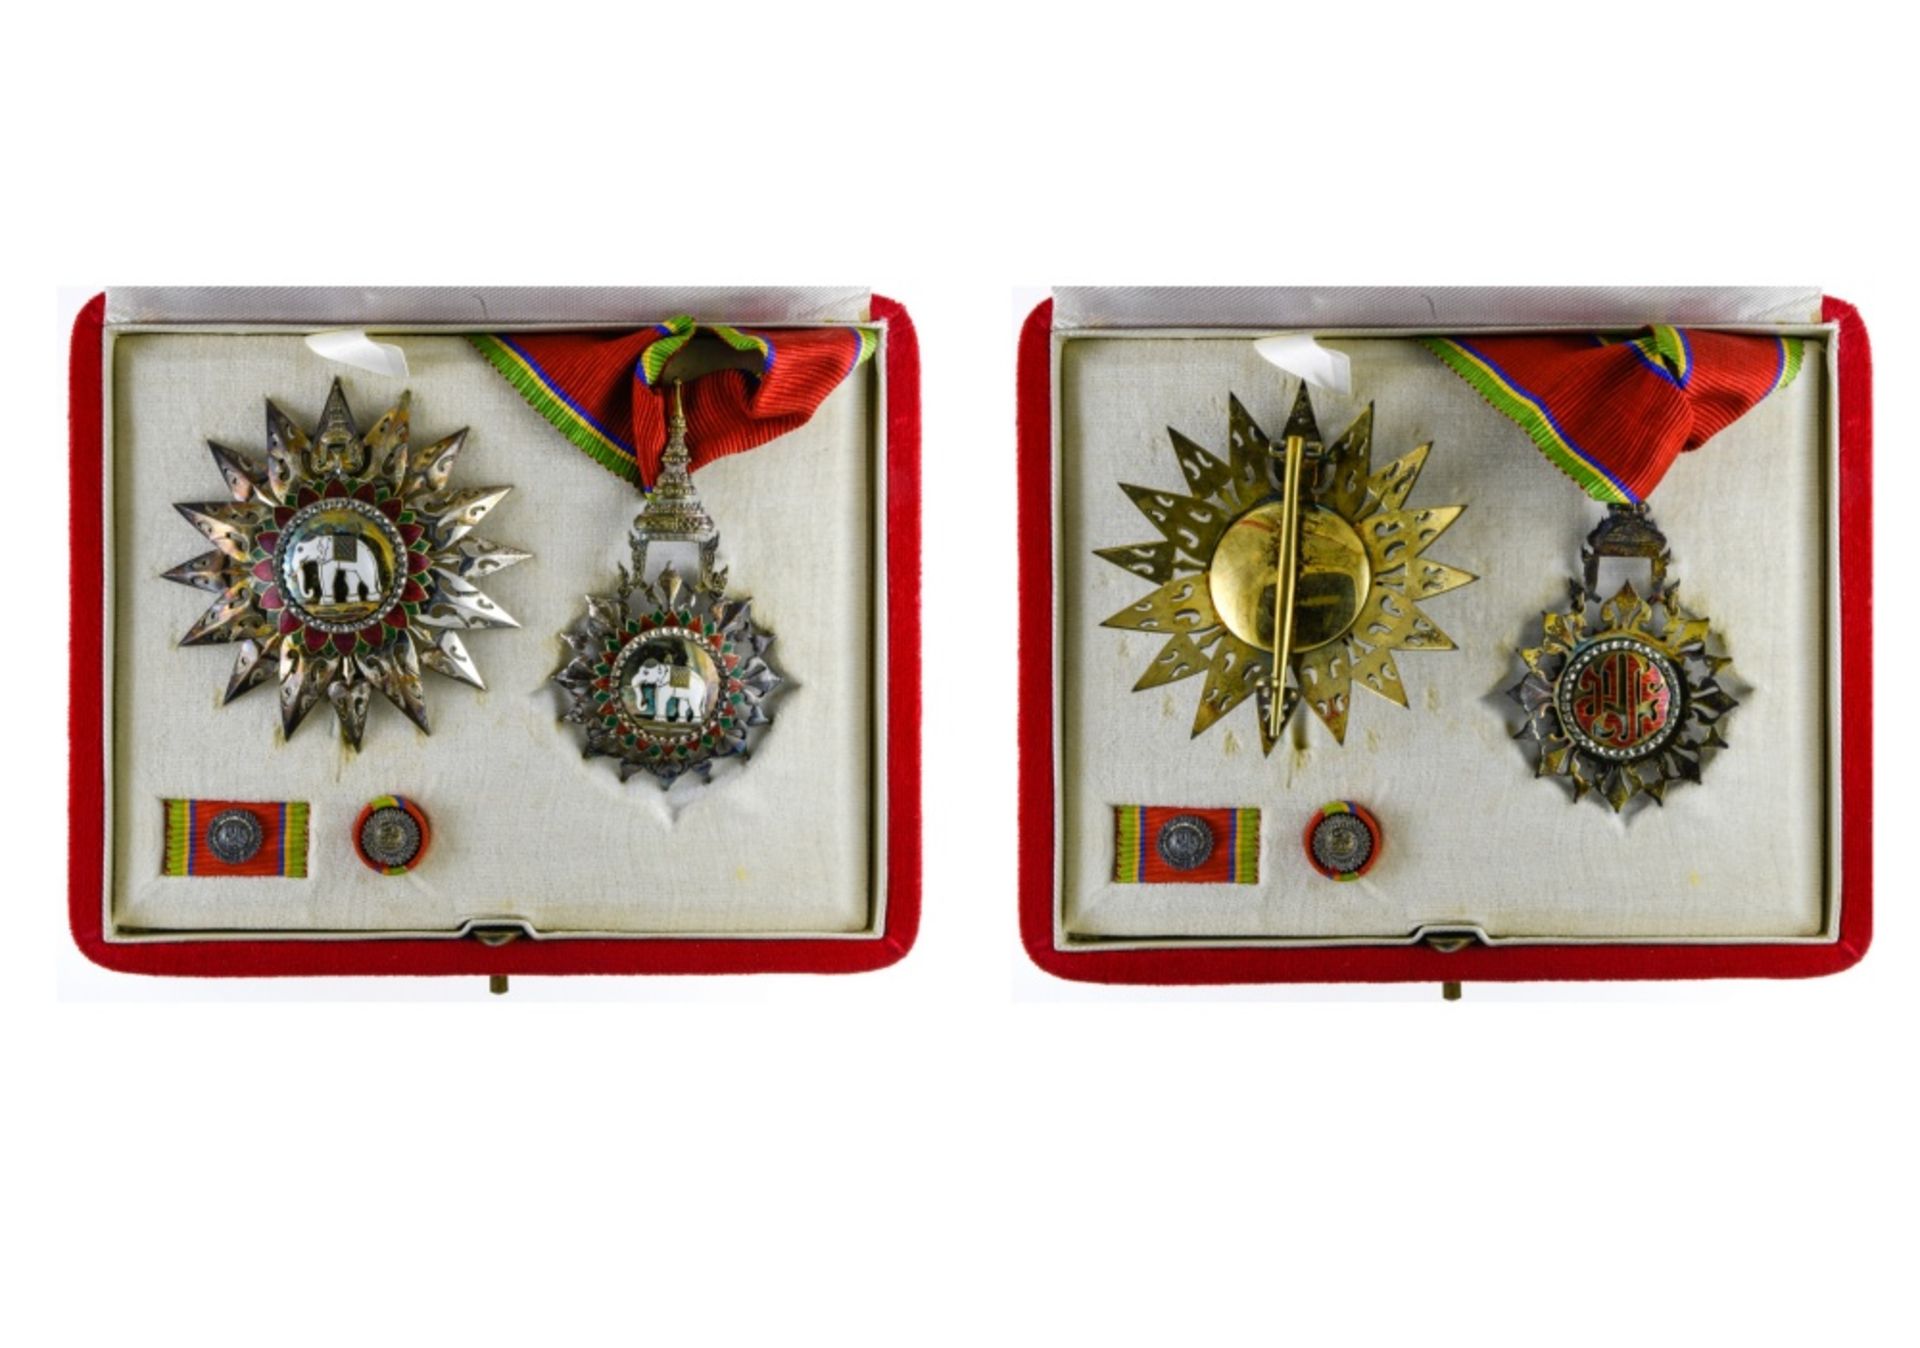 Thailand Order of the White Elephant, Commander's cross, 87mm and breast star, 80mm, with lapel pin.